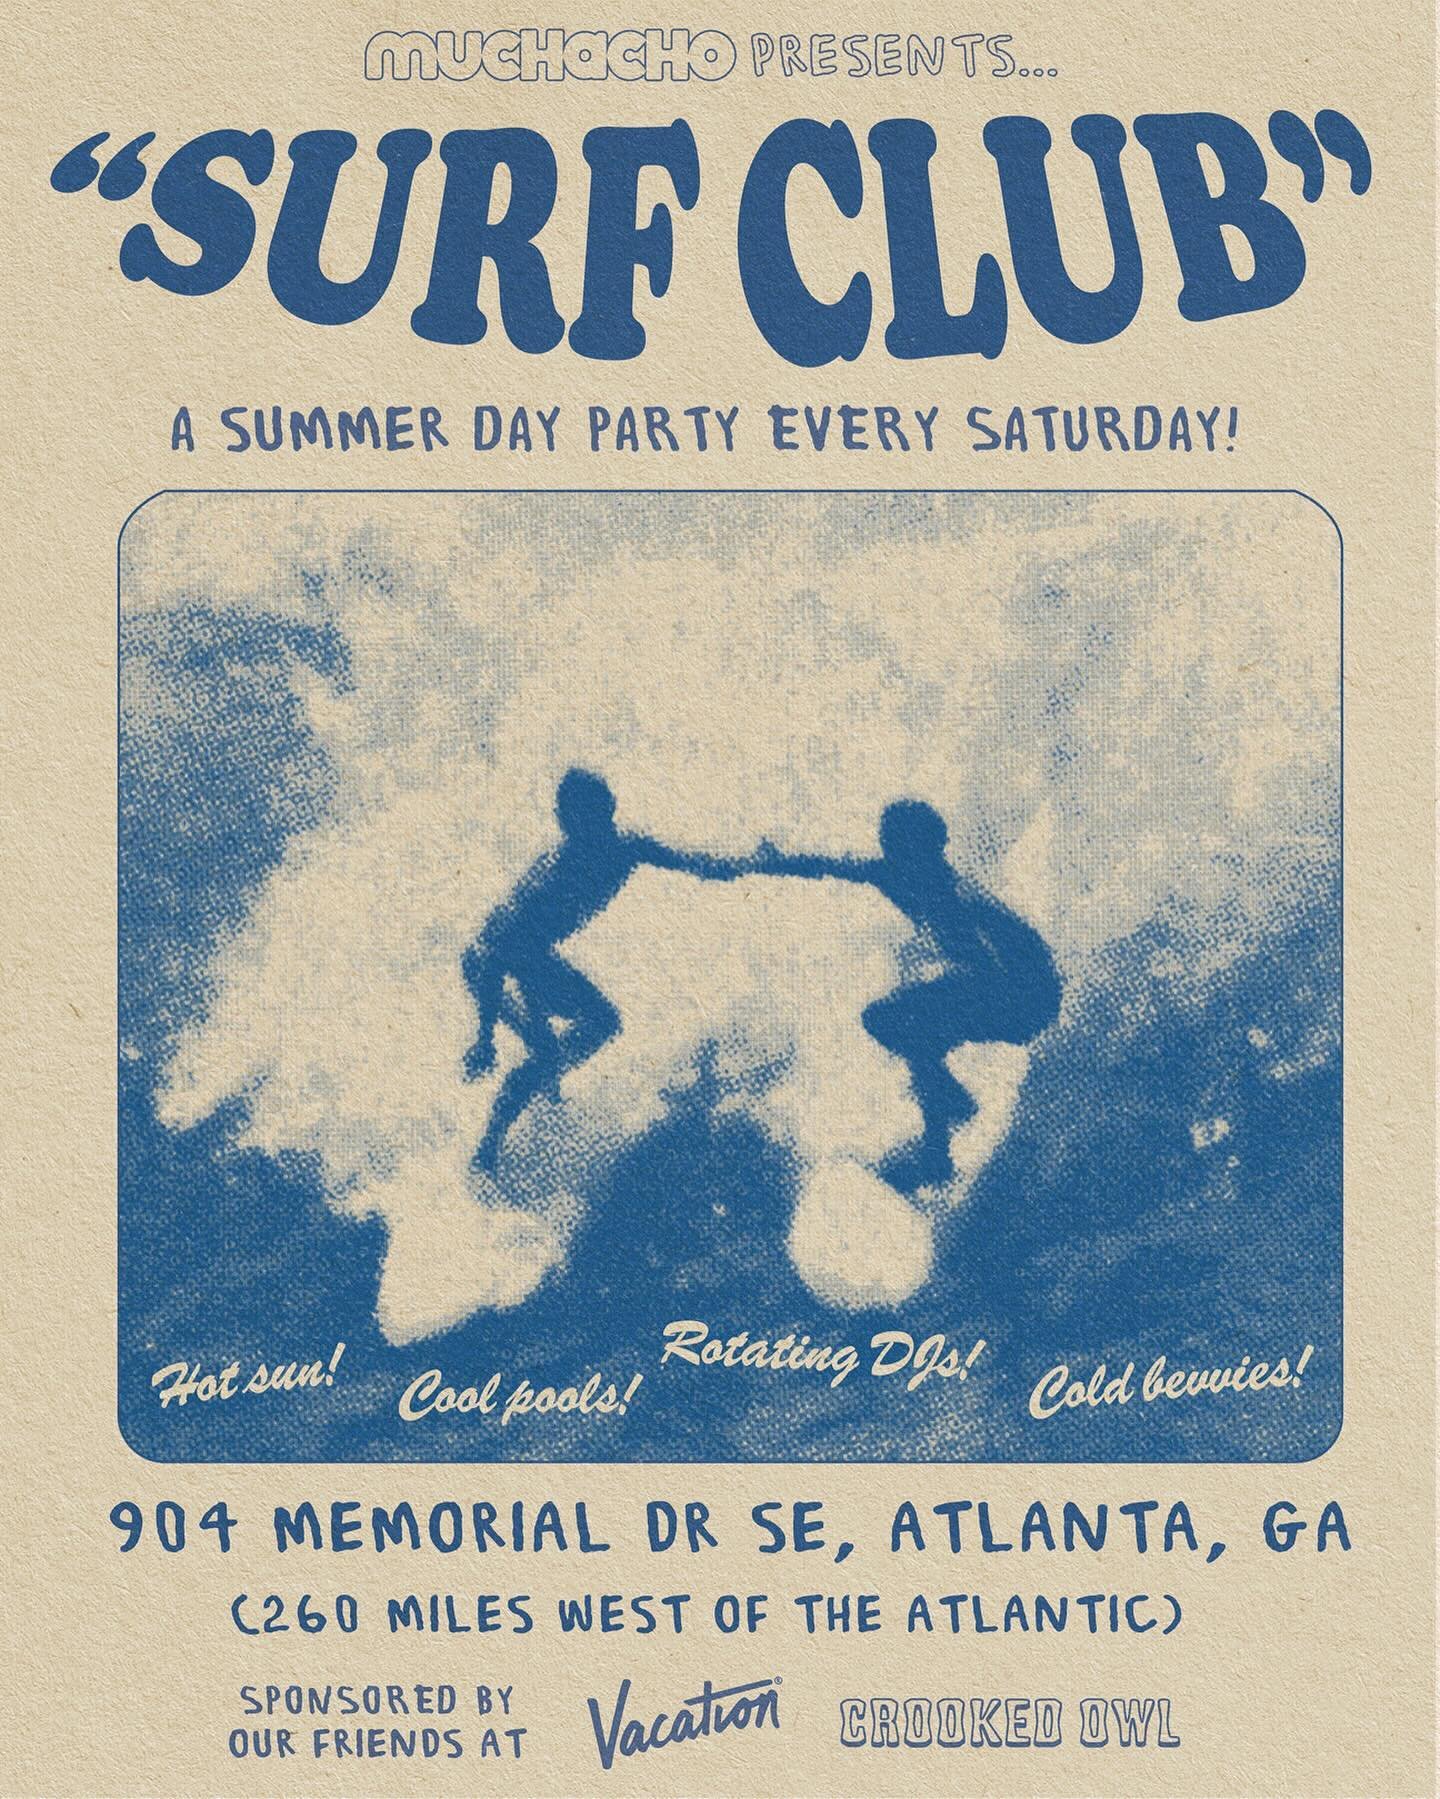 We can&rsquo;t keep the secret any longer&hellip;We present to you the biggest! hottest! most refreshing! day party of the summer&hellip;SURF CLUB 🏄🔥 Every Saturday starting 5/18 from 12pm-whenever!

We&rsquo;re talking the grooviest of rotating DJ